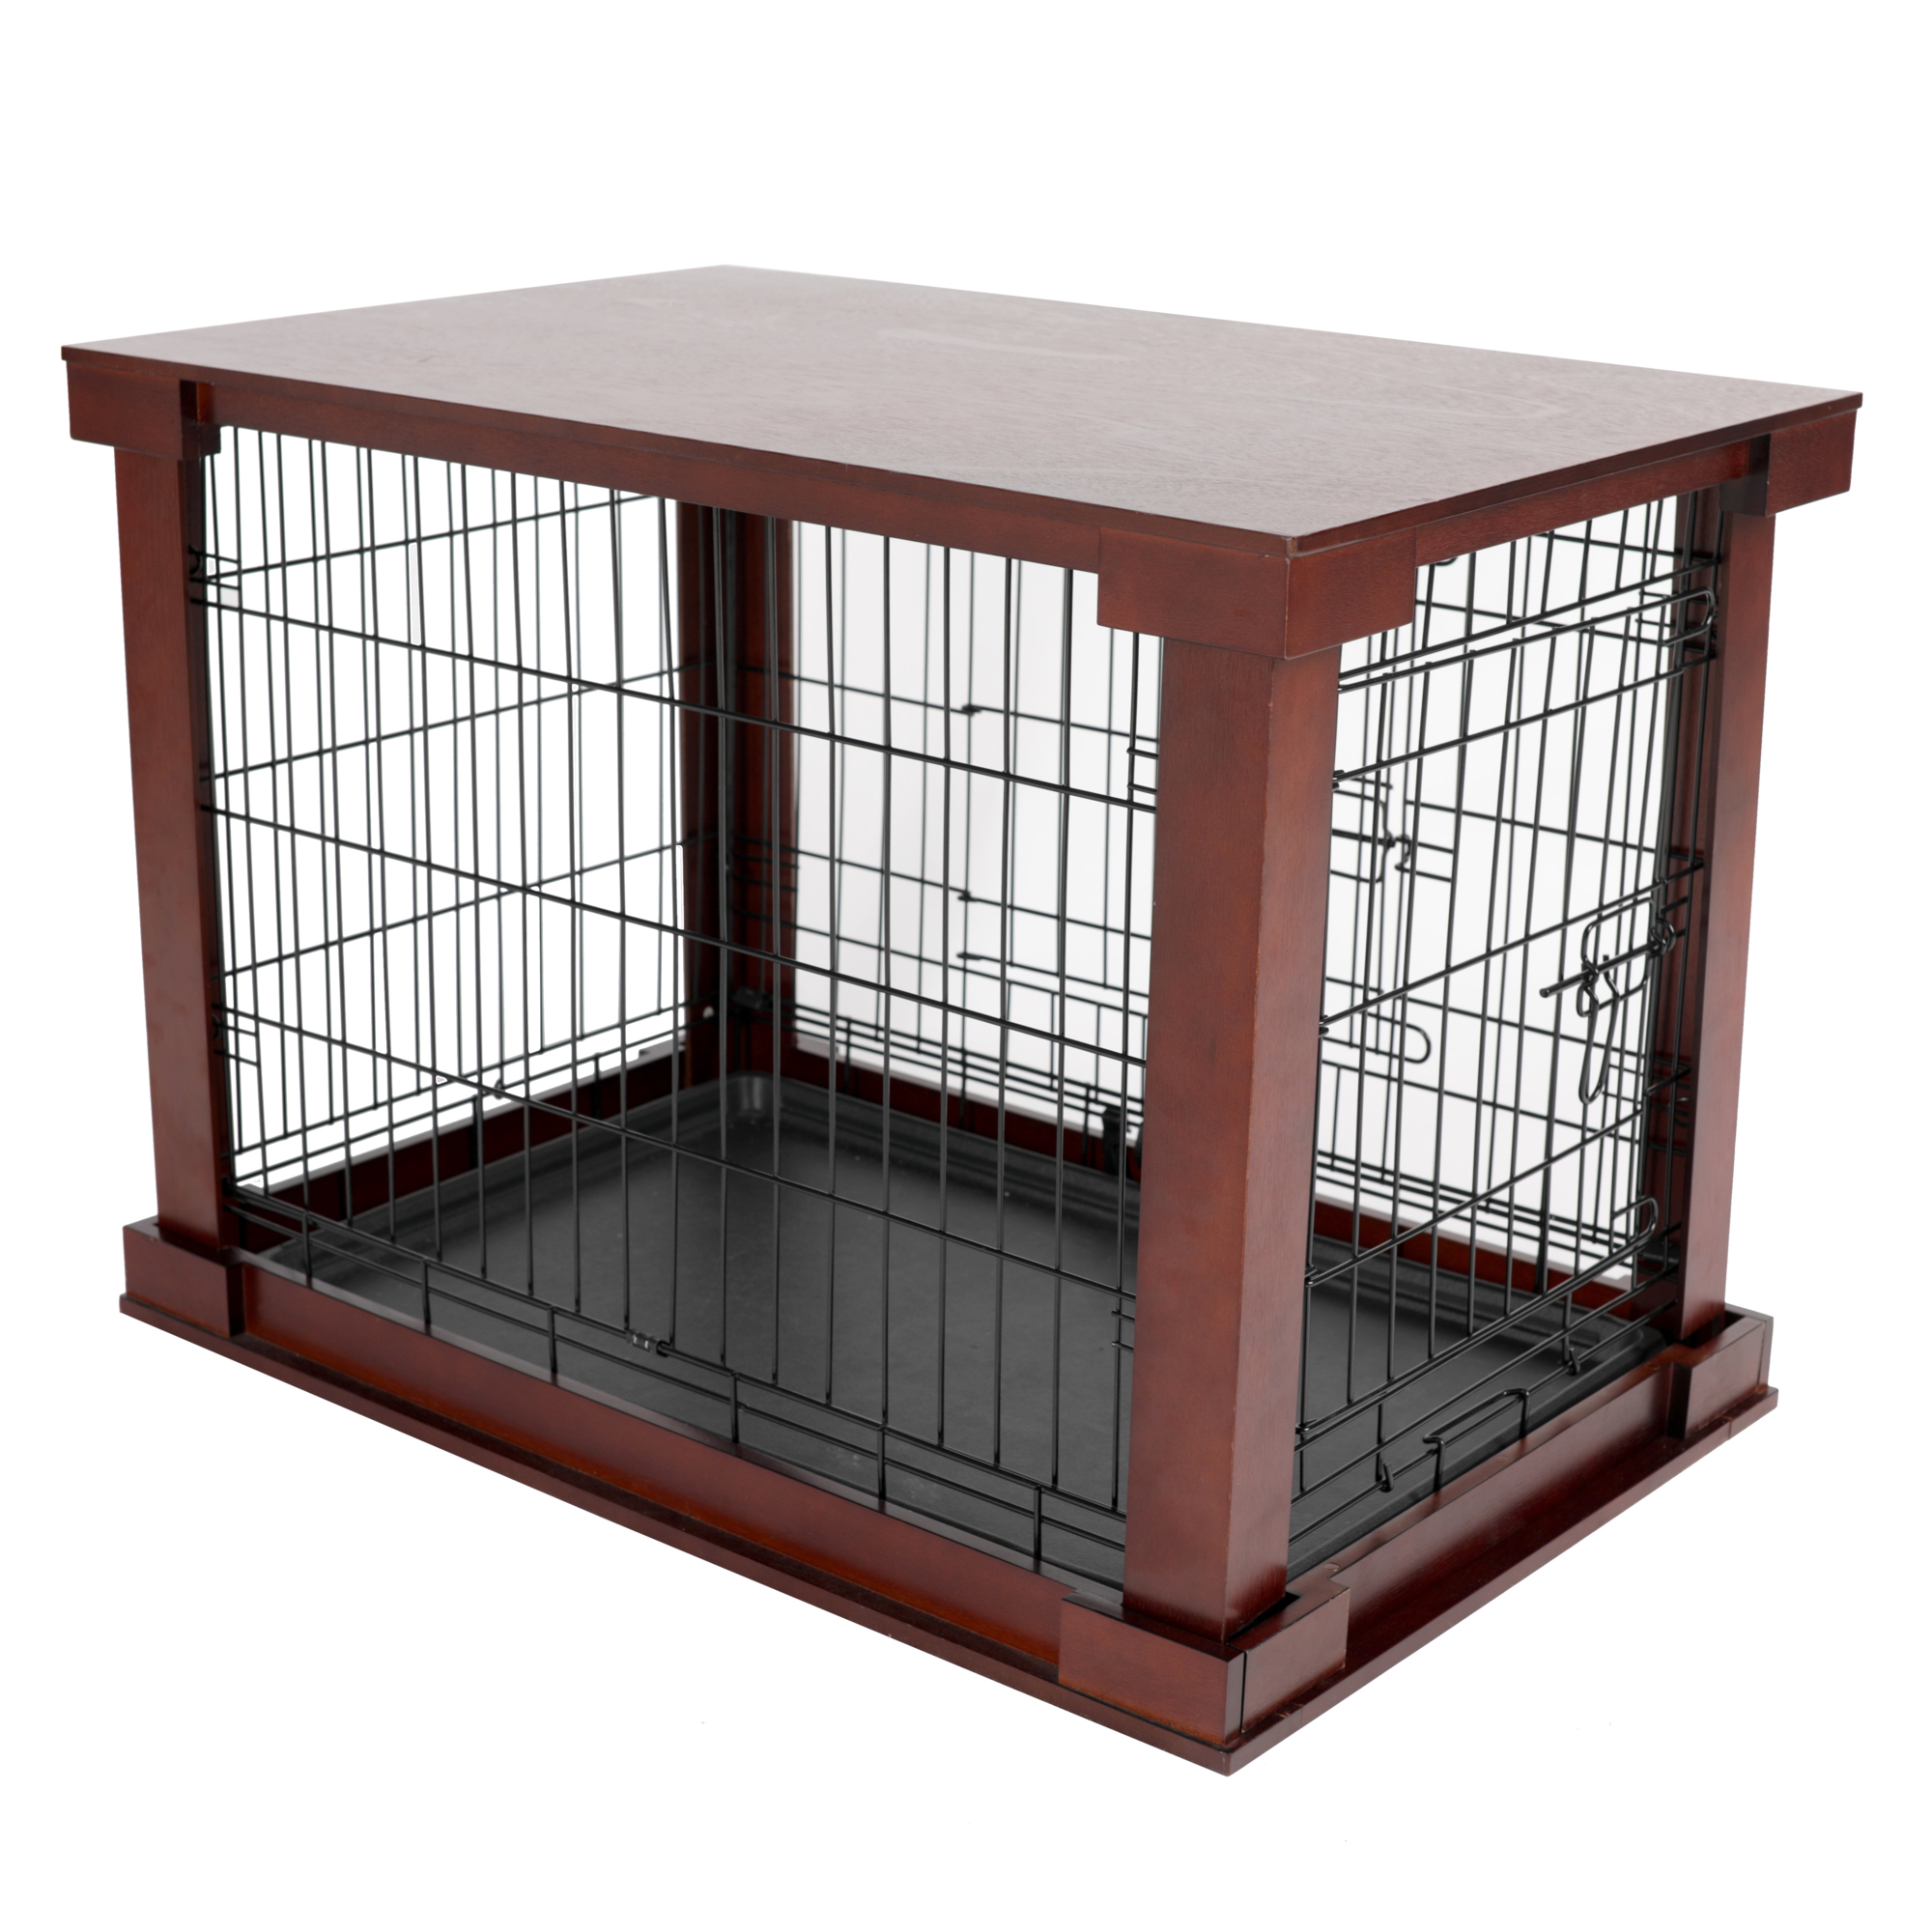 Merry Products, Cage with Crate Cover, Mahogany, Large, Model MPLC001